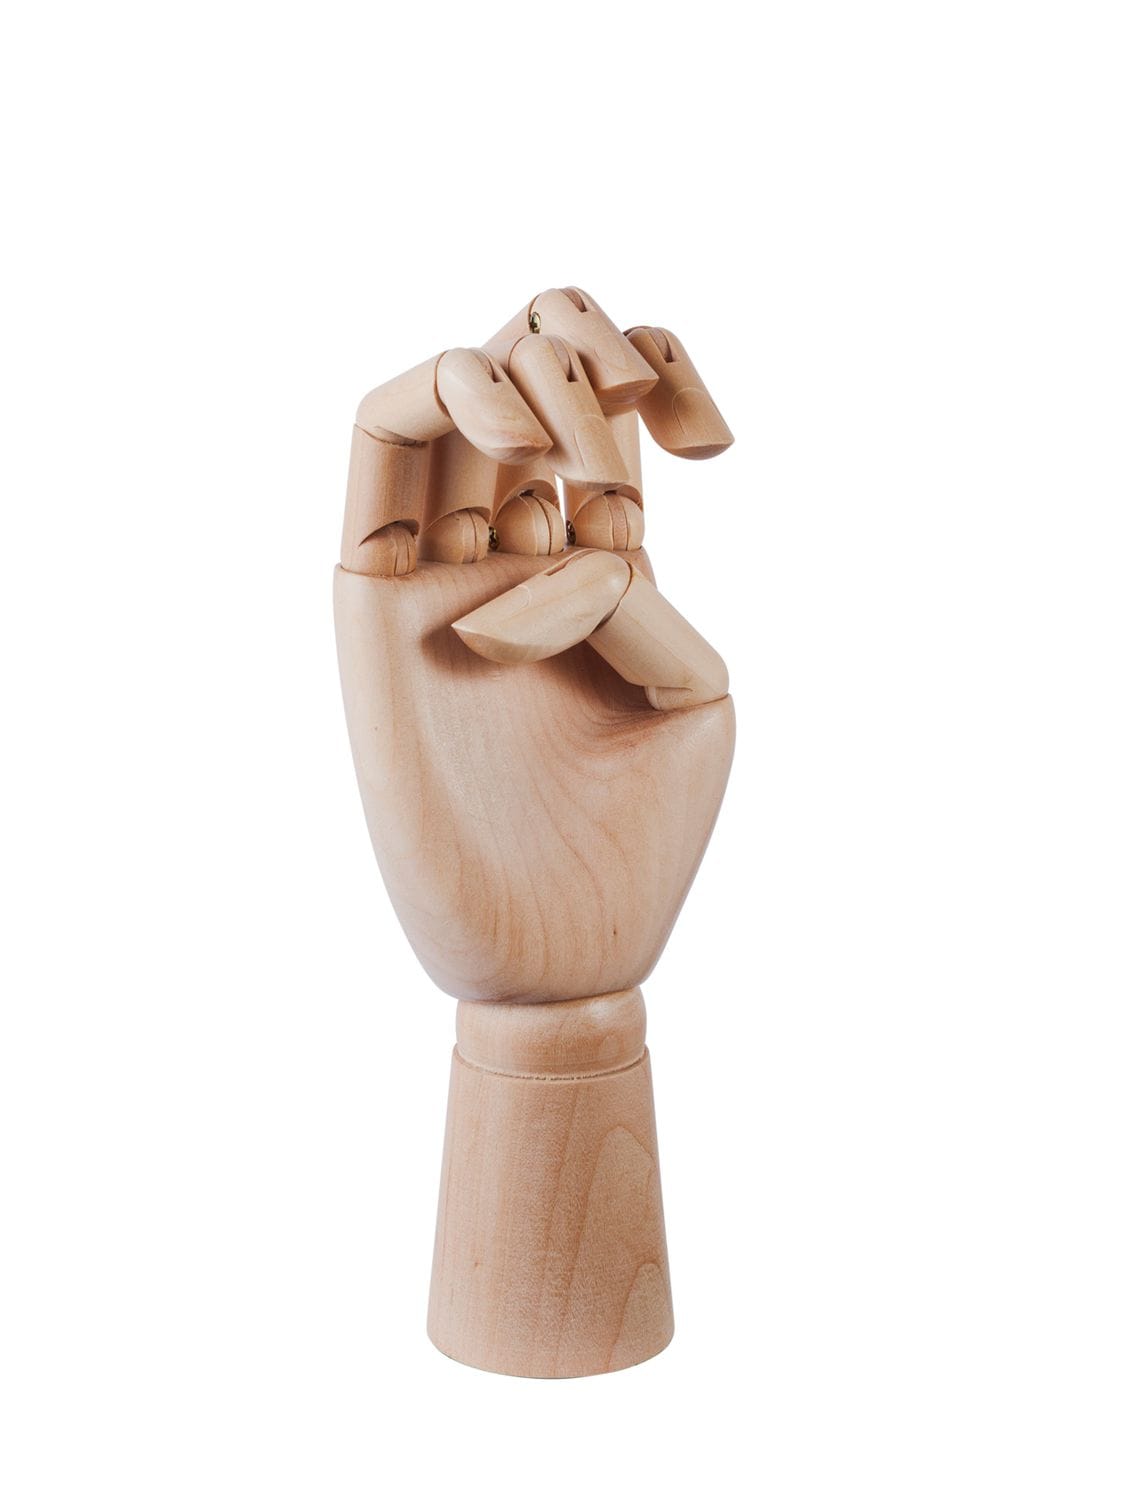 Image of Wooden Hand